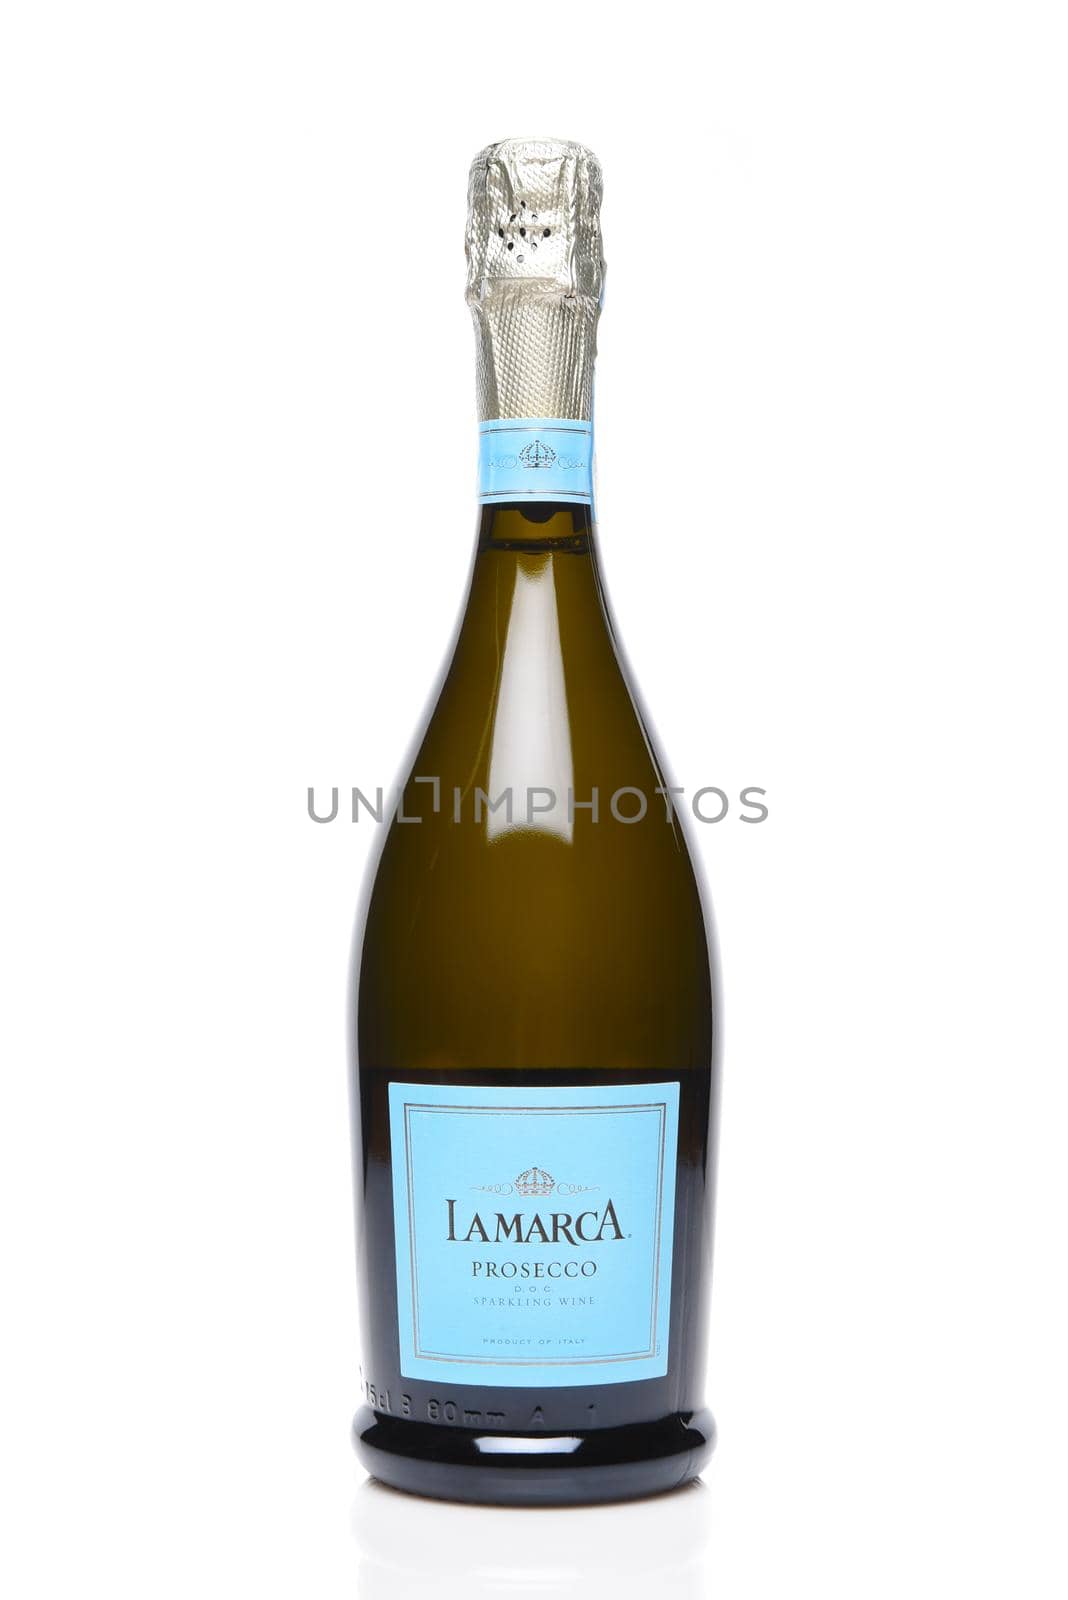 IRIVNE, CALIFORNIA- JULY 31, 2019:  A bottle of LaMarca Prosecco a sparkling wine from Italy.